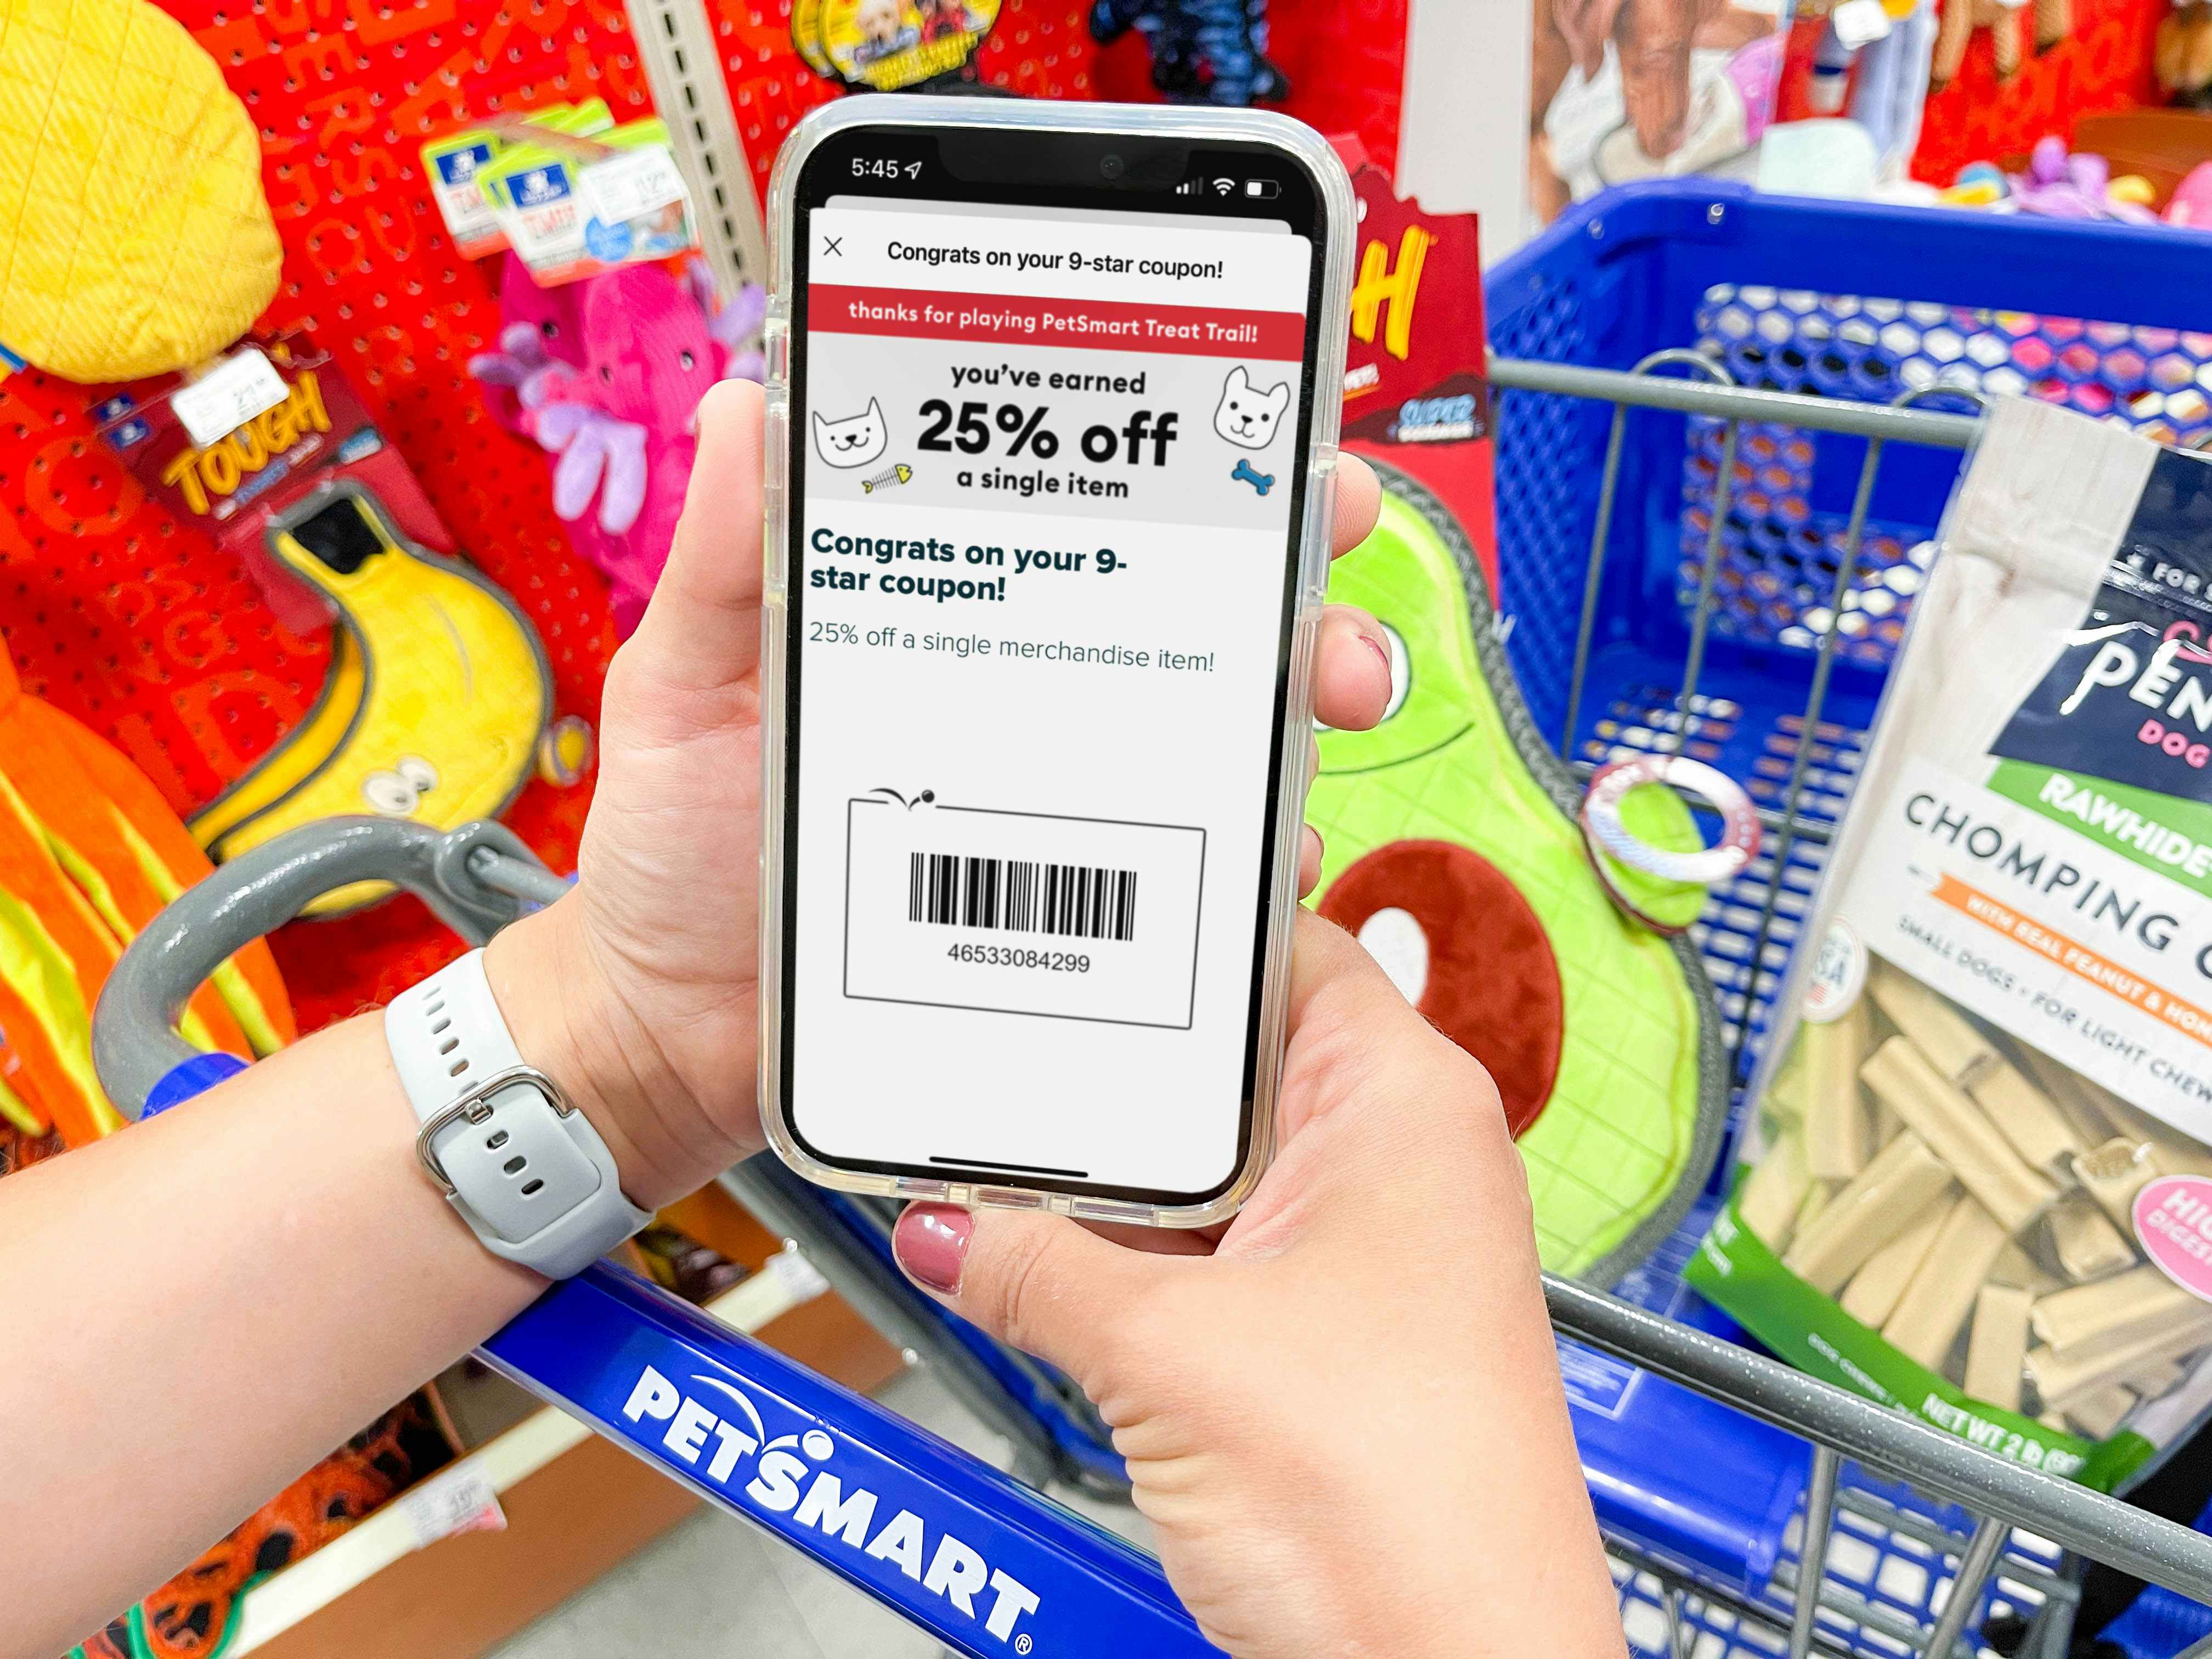 A person's hands holding a cellphone displaying a Treat Trail game coupon on the Petsmart app in front of a PetSmart shopping cart with a dog toy and treats in the basket.